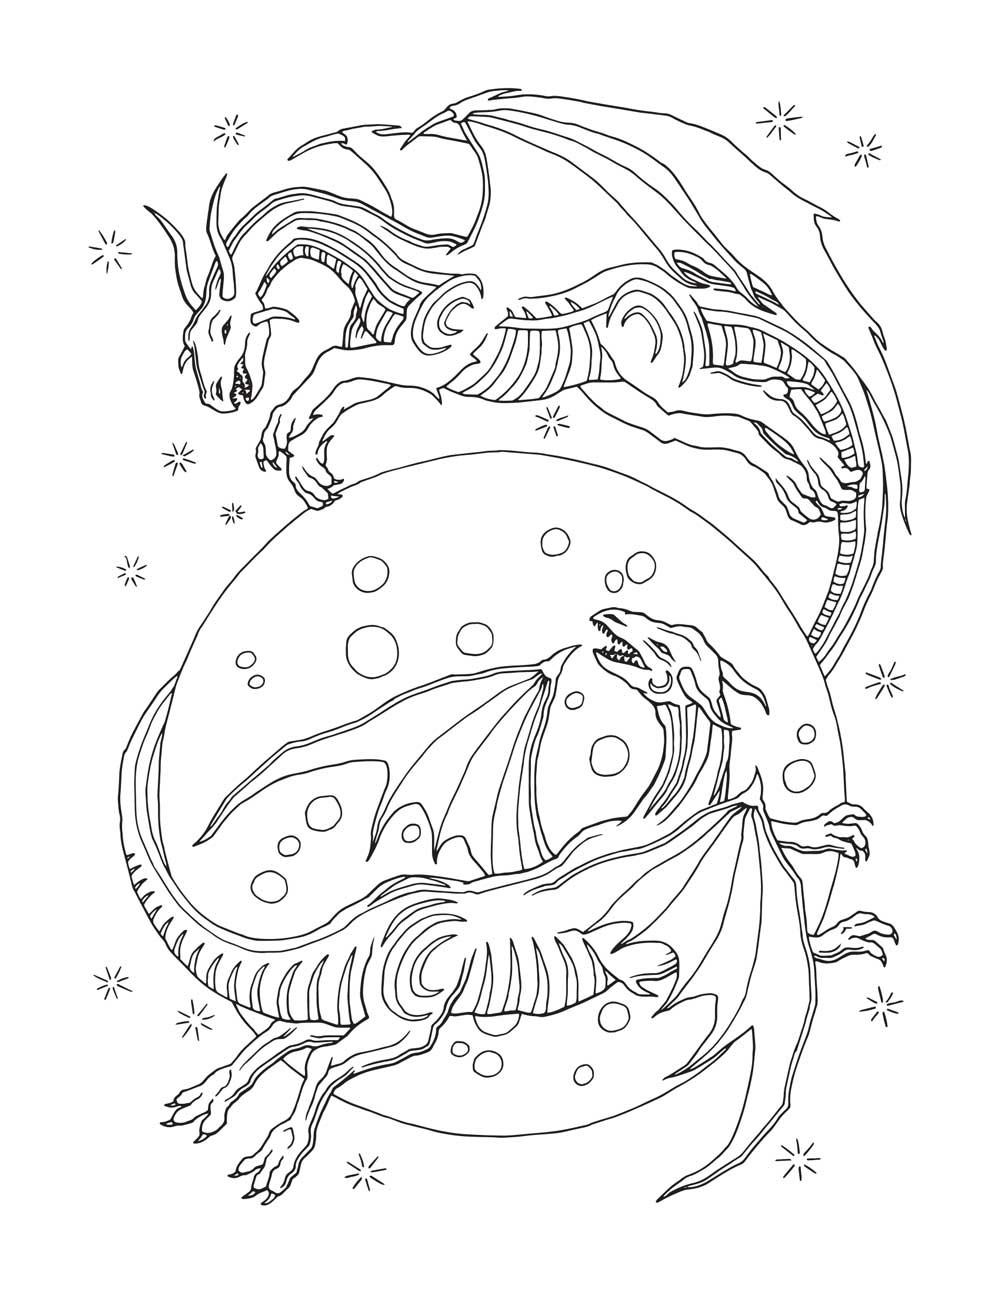 Dragon Coloring Books For Adults
 Dragon Coloring Pages for Adults Best Coloring Pages For